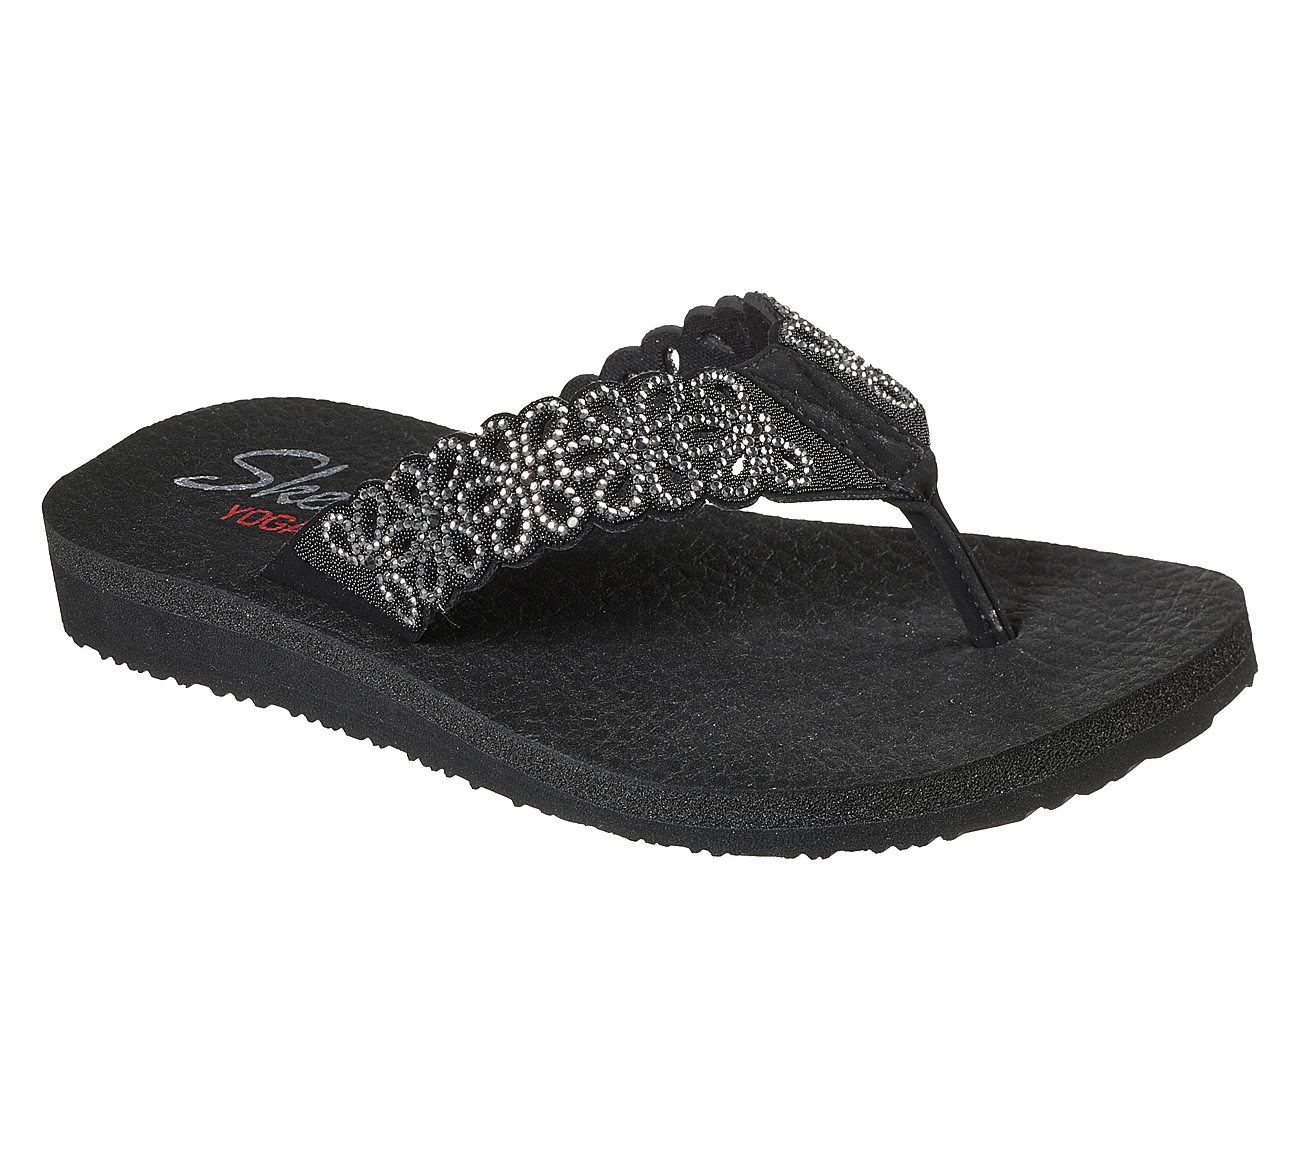 MEDITATION - SIMPLE FLORAL, BLACK/SILVER Footwear Right View